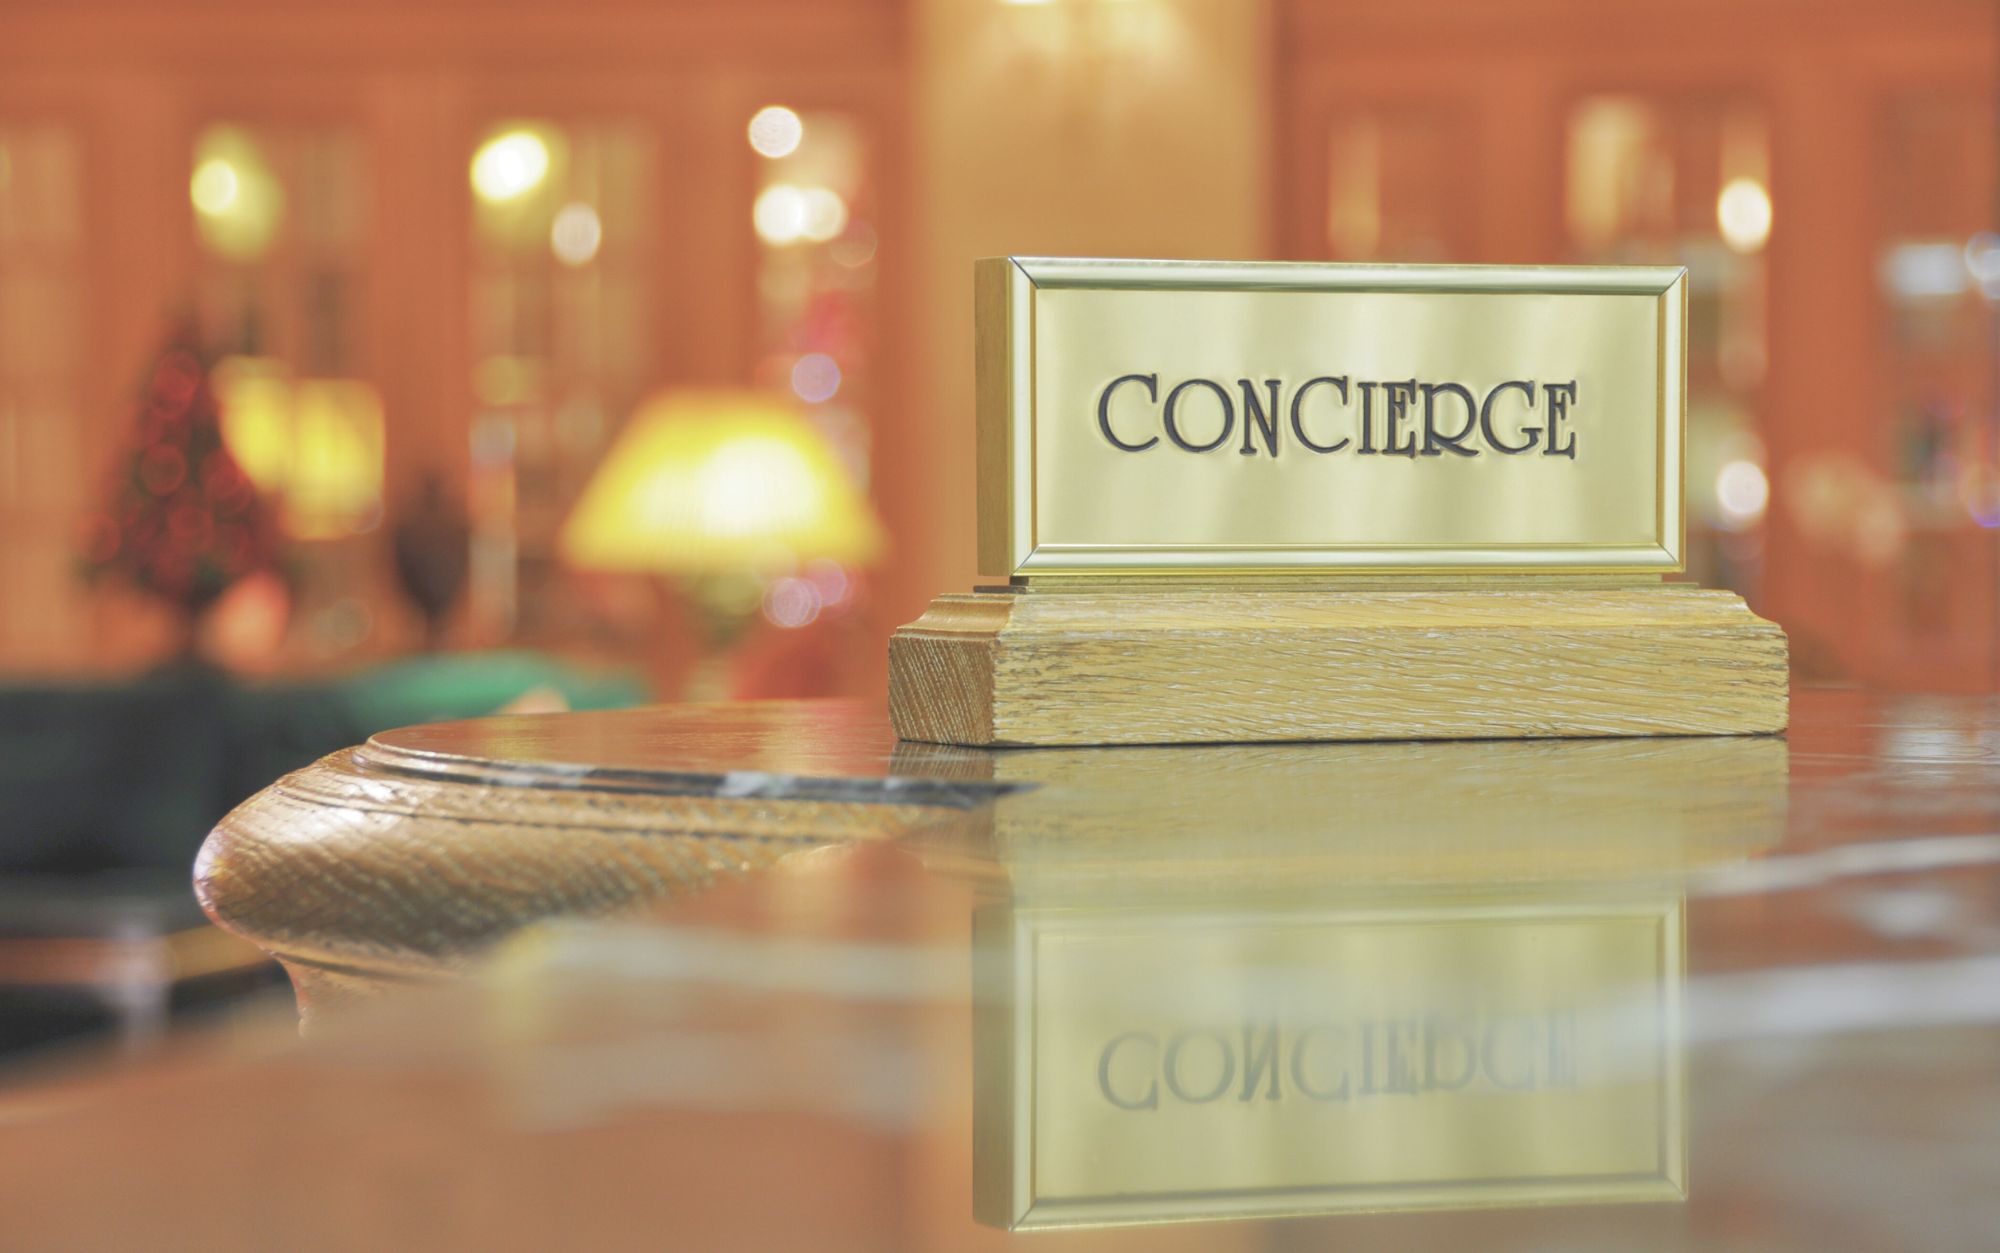 An image attempting to show that we have <b>Concierge Services</b>